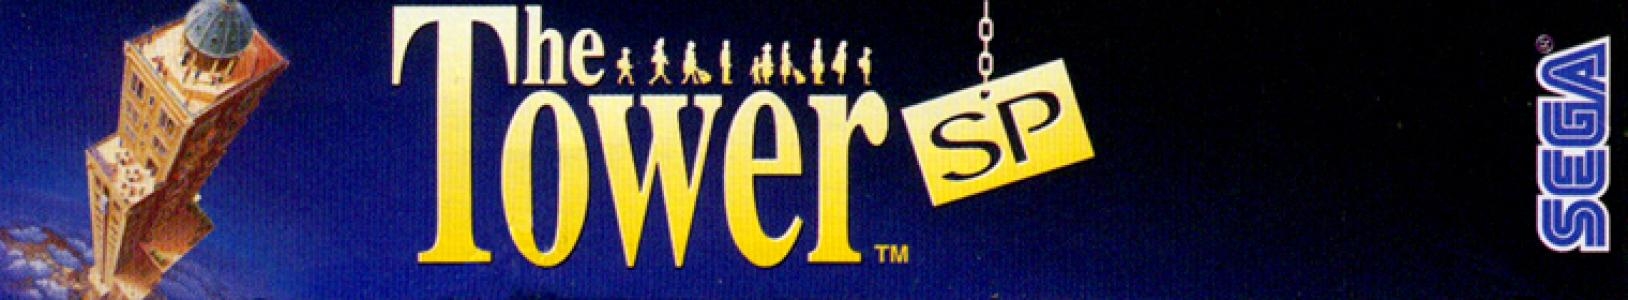 The Tower SP banner